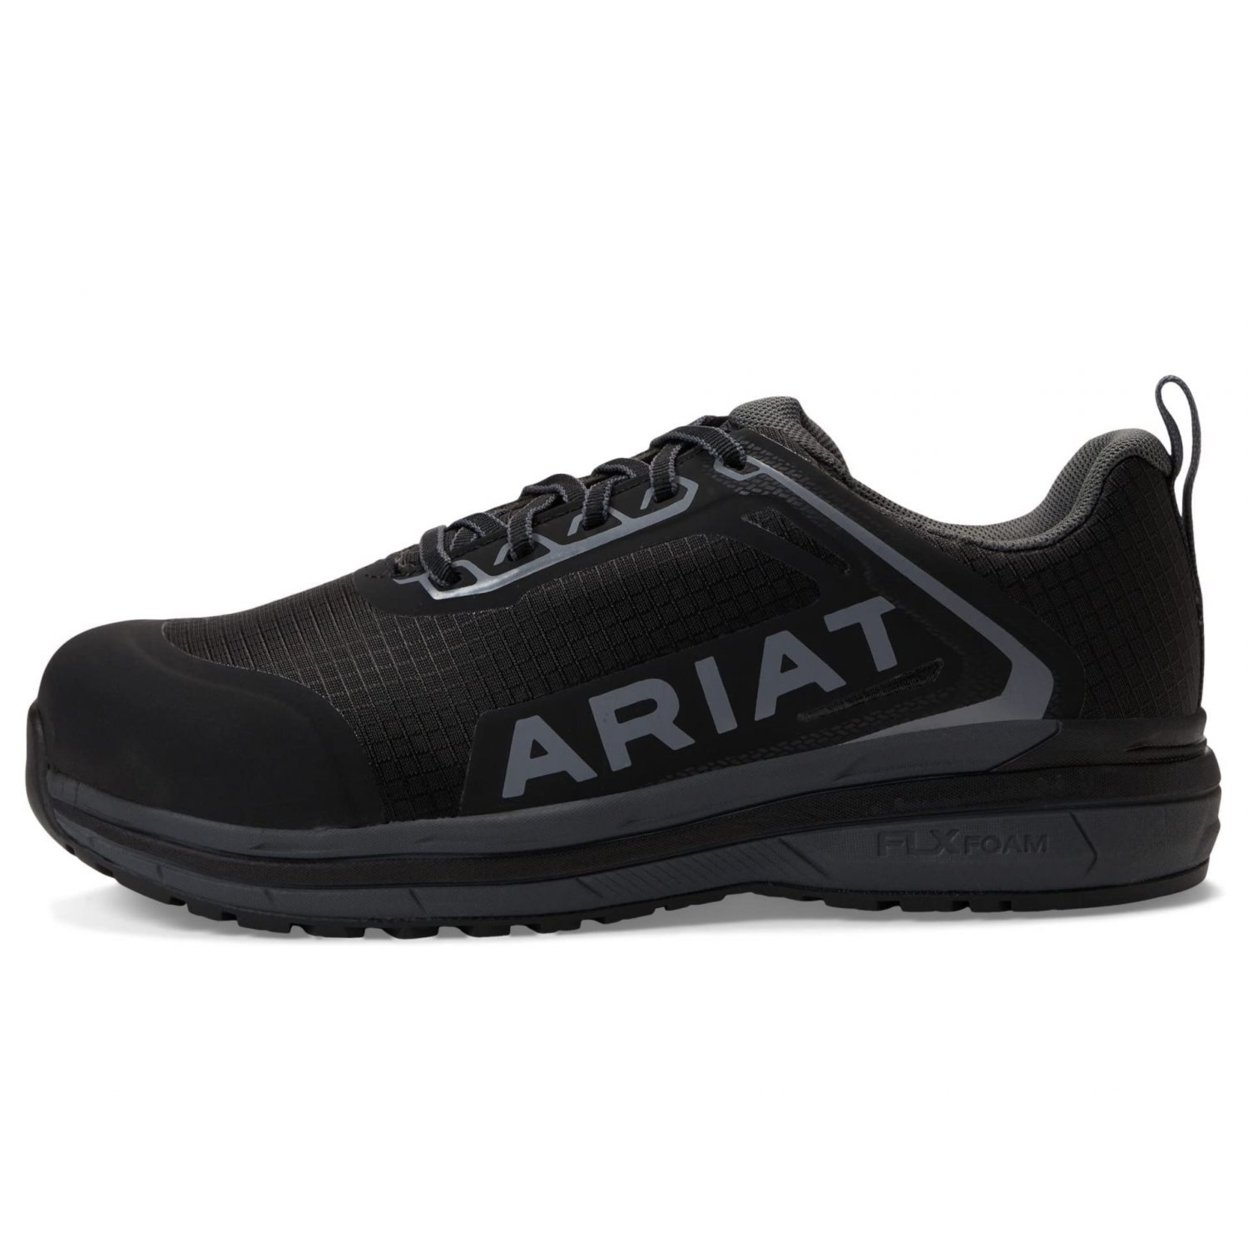 ARIAT Women's Outpace Composite Toe Safety Shoe Fire ONE SIZE BLACK - BLACK, 6.5